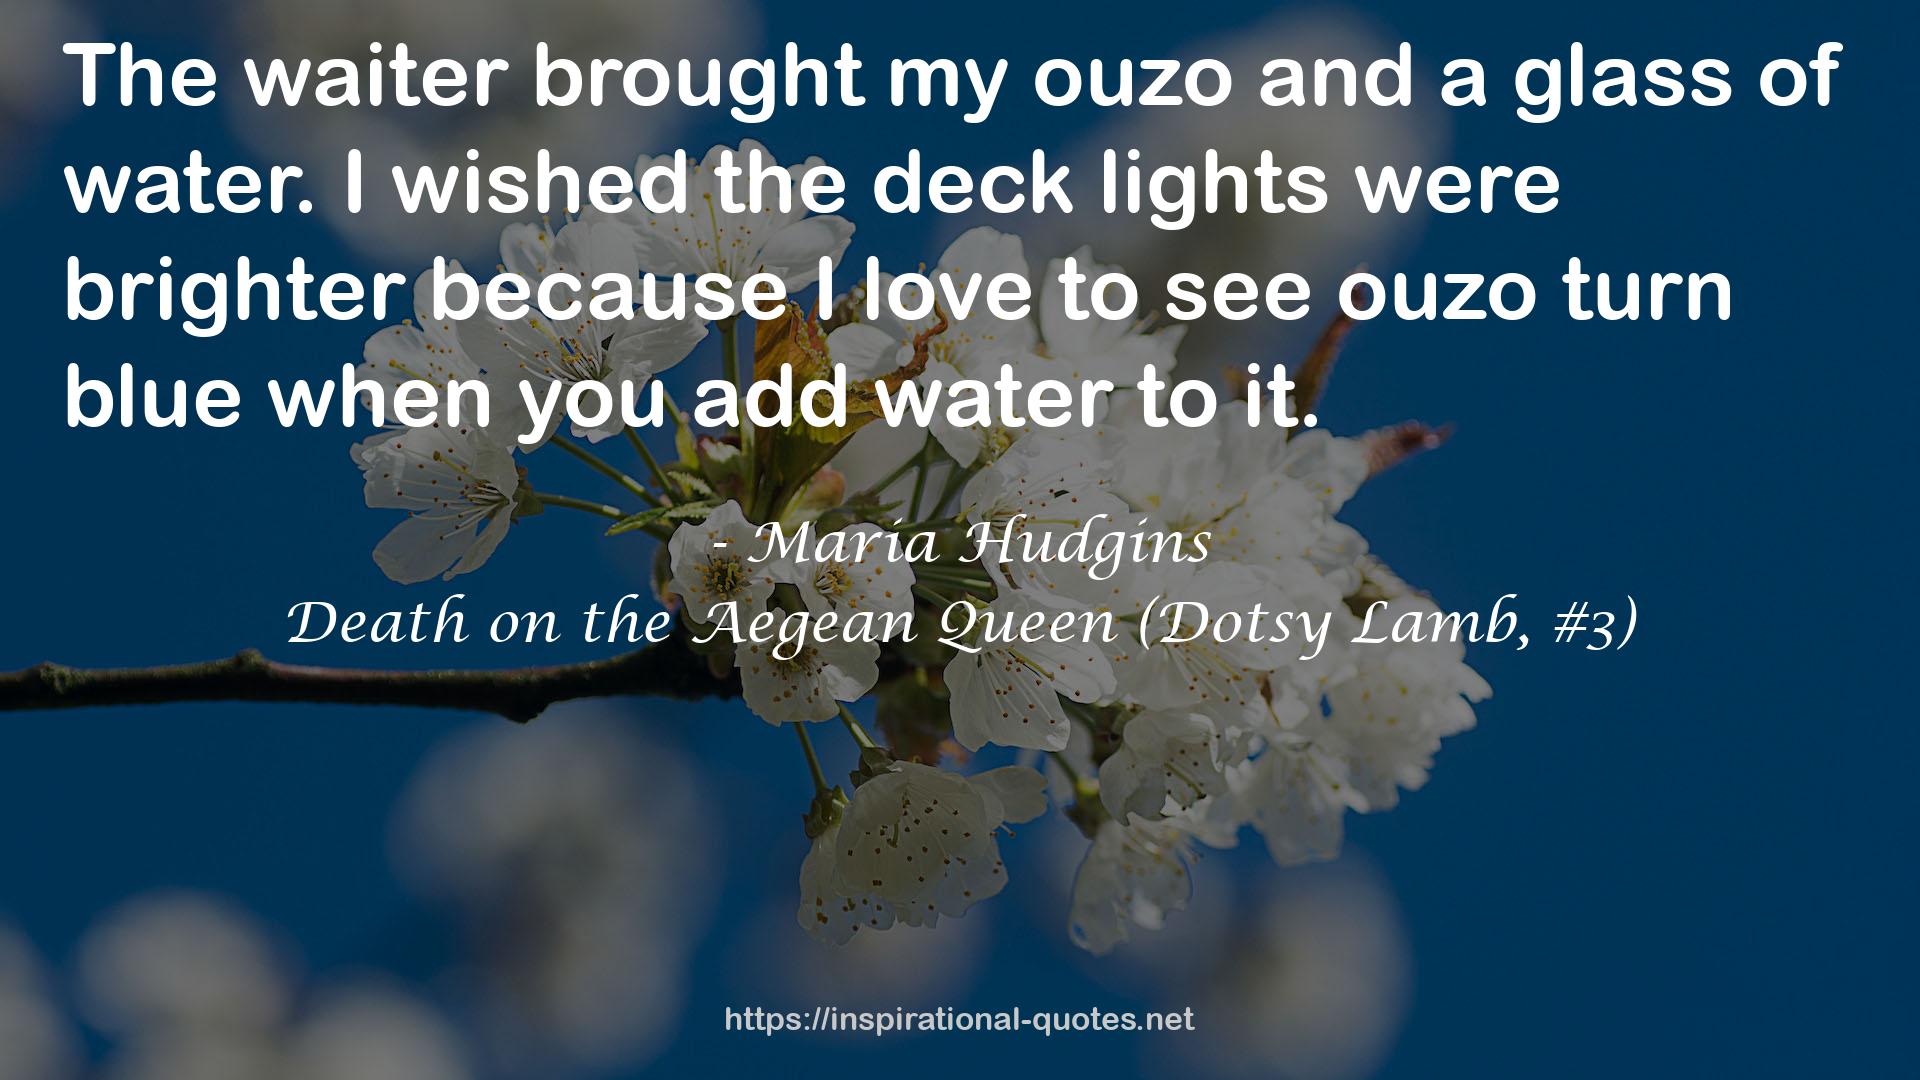 Death on the Aegean Queen (Dotsy Lamb, #3) QUOTES